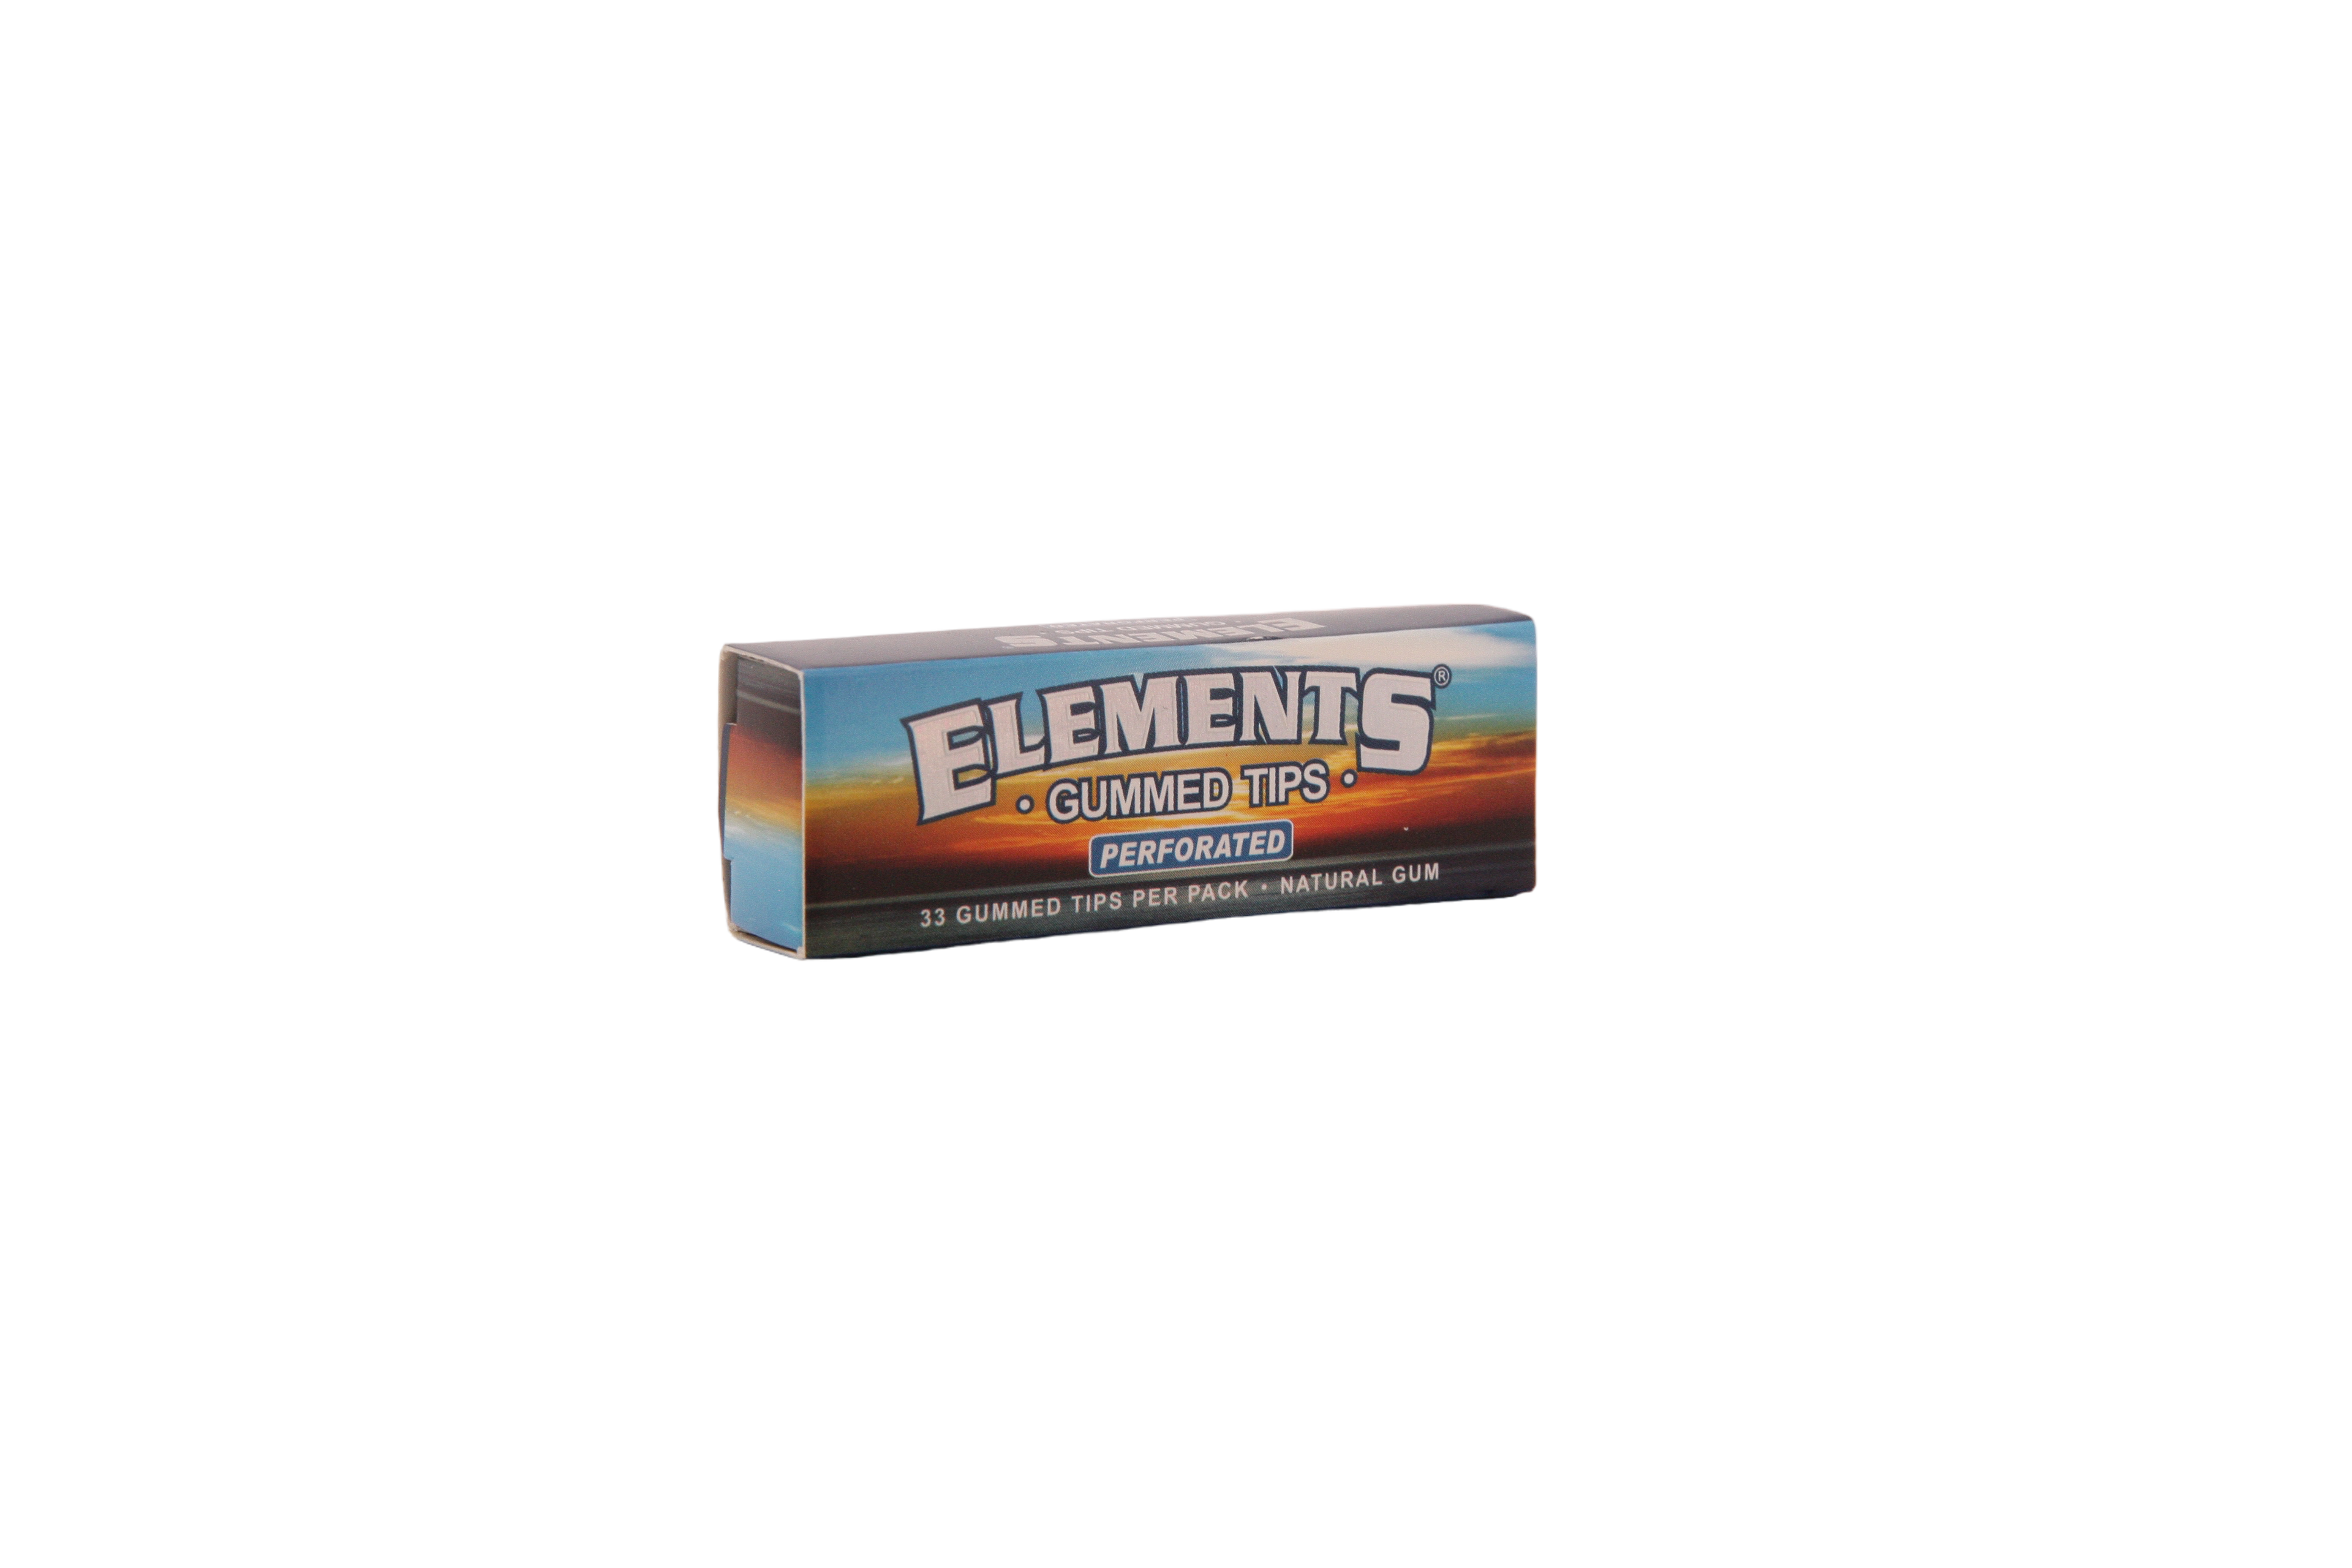 Elements Perforated Gummed Tips